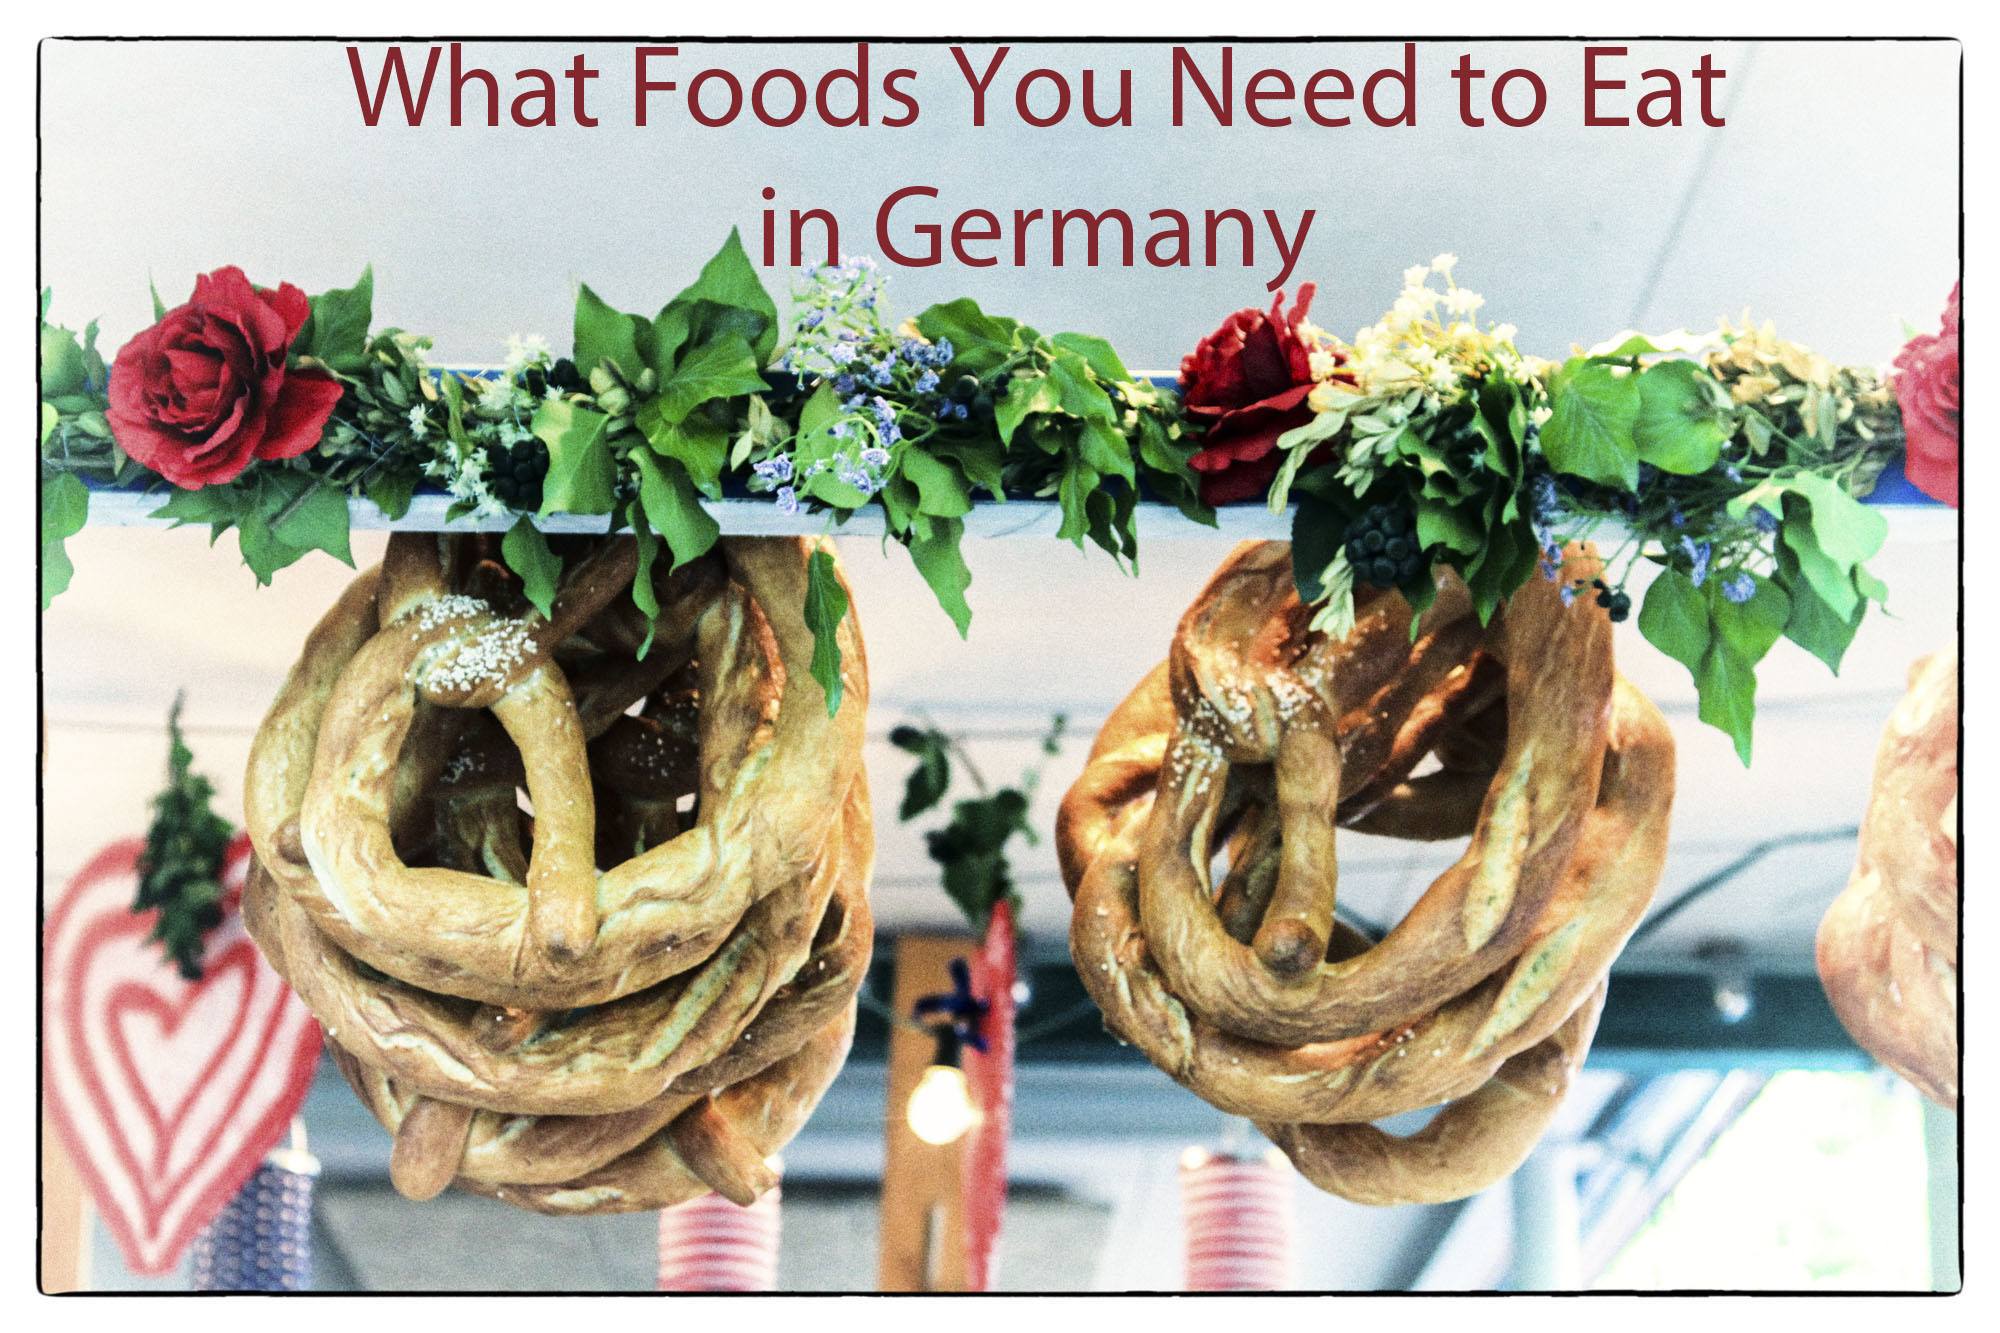 What to Eat in Germany - A Traditional German Food Guide - Reflections